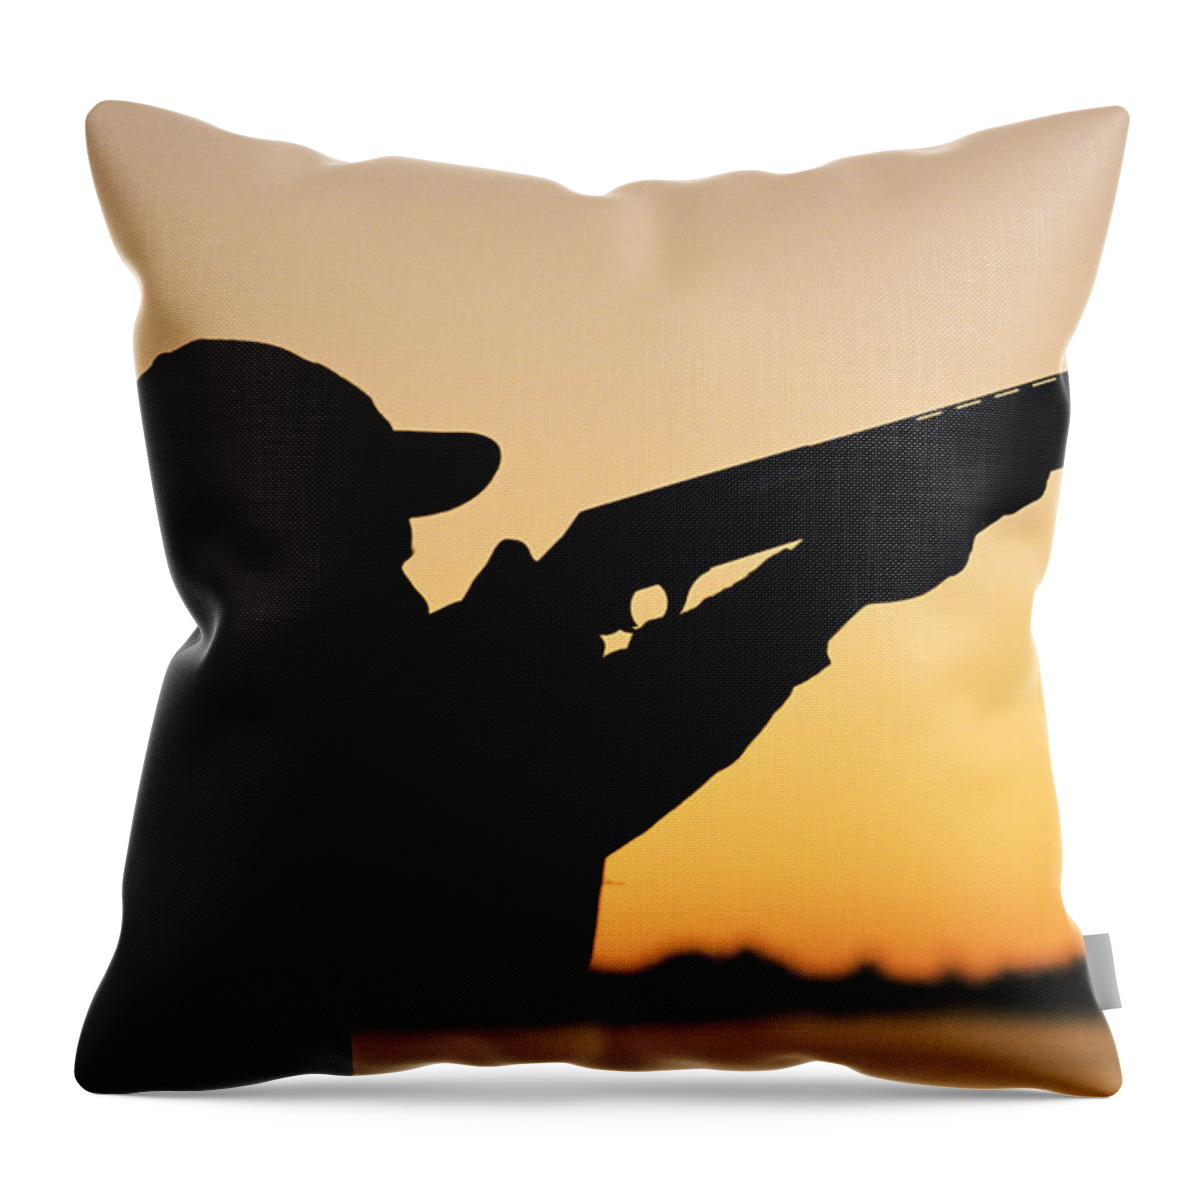 Rifle Throw Pillow featuring the photograph Silhouette Of Hunter And Gun by J&l Images